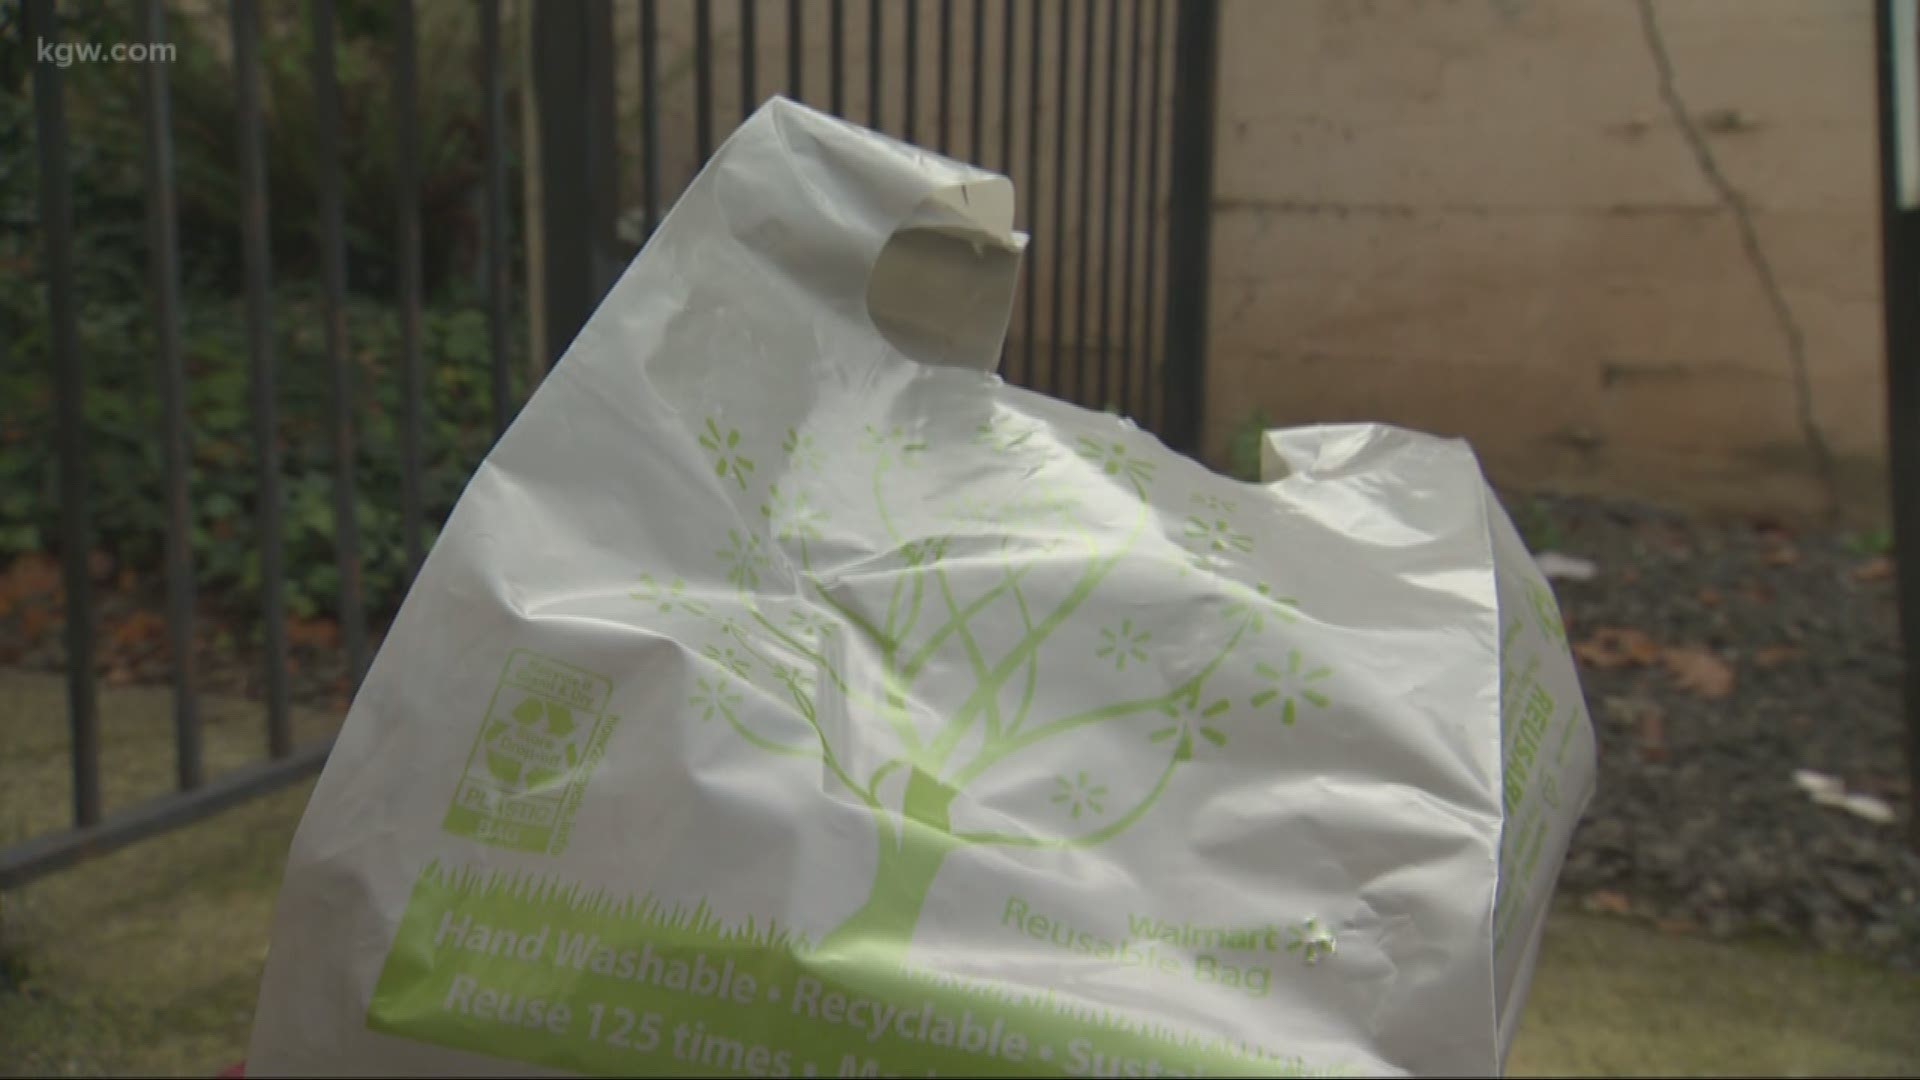 Plastic bags are banned in grocery stores in Oregon. Why is one major chain still allowed to use them?